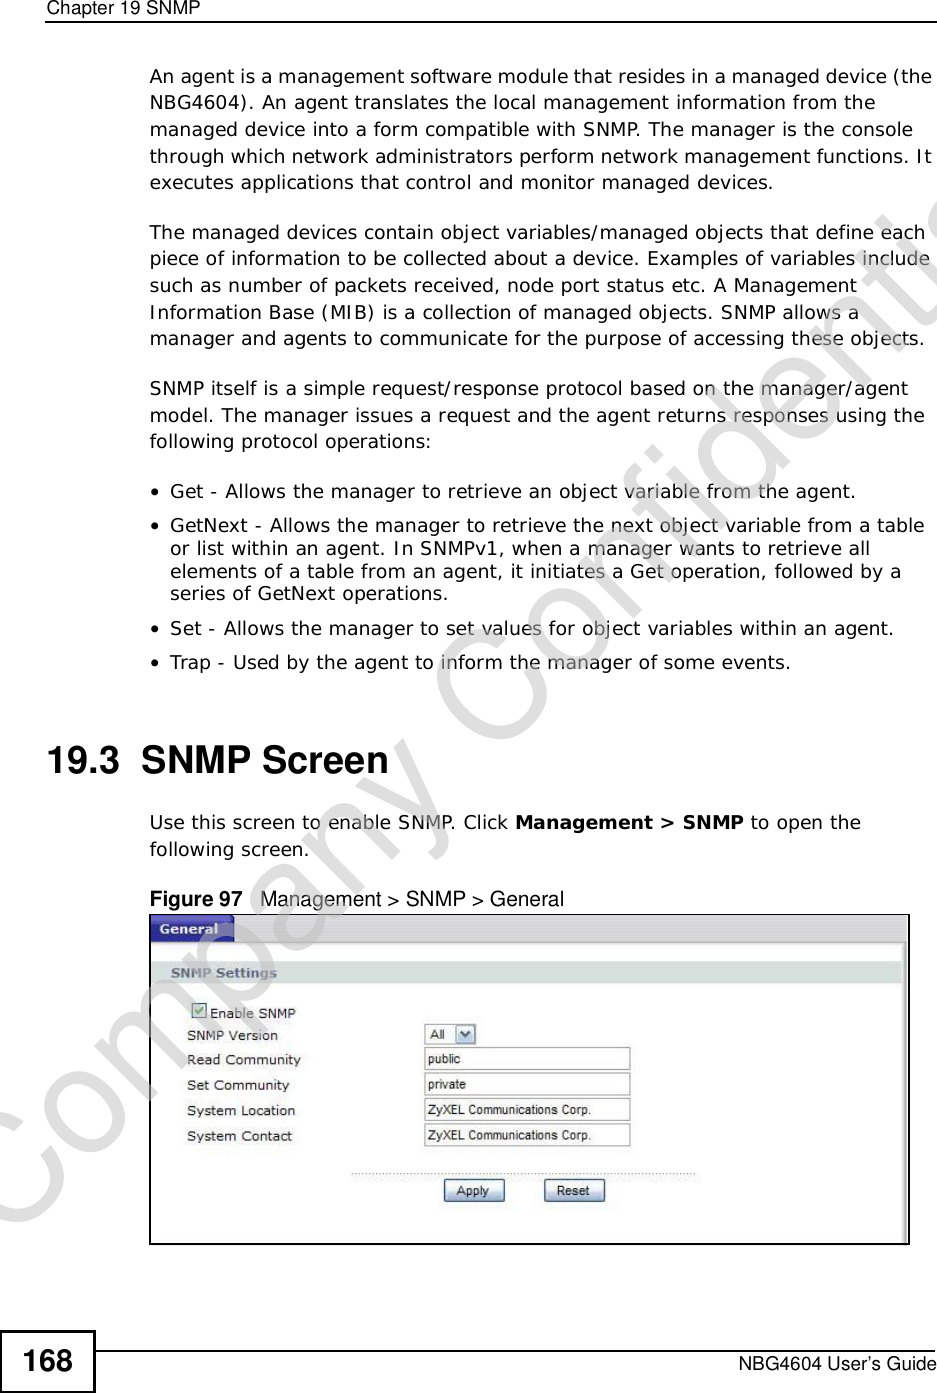 Chapter 19SNMPNBG4604 User’s Guide168An agent is a management software module that resides in a managed device (the NBG4604). An agent translates the local management information from the managed device into a form compatible with SNMP. The manager is the console through which network administrators perform network management functions. It executes applications that control and monitor managed devices. The managed devices contain object variables/managed objects that define each piece of information to be collected about a device. Examples of variables include such as number of packets received, node port status etc. A Management Information Base (MIB) is a collection of managed objects. SNMP allows a manager and agents to communicate for the purpose of accessing these objects.SNMP itself is a simple request/response protocol based on the manager/agent model. The manager issues a request and the agent returns responses using the following protocol operations:•Get - Allows the manager to retrieve an object variable from the agent. •GetNext - Allows the manager to retrieve the next object variable from a table or list within an agent. In SNMPv1, when a manager wants to retrieve all elements of a table from an agent, it initiates a Get operation, followed by a series of GetNext operations. •Set - Allows the manager to set values for object variables within an agent. •Trap - Used by the agent to inform the manager of some events.19.3  SNMP ScreenUse this screen to enable SNMP. Click Management &gt; SNMP to open the following screen.Figure 97   Management &gt; SNMP &gt; General Company Confidential